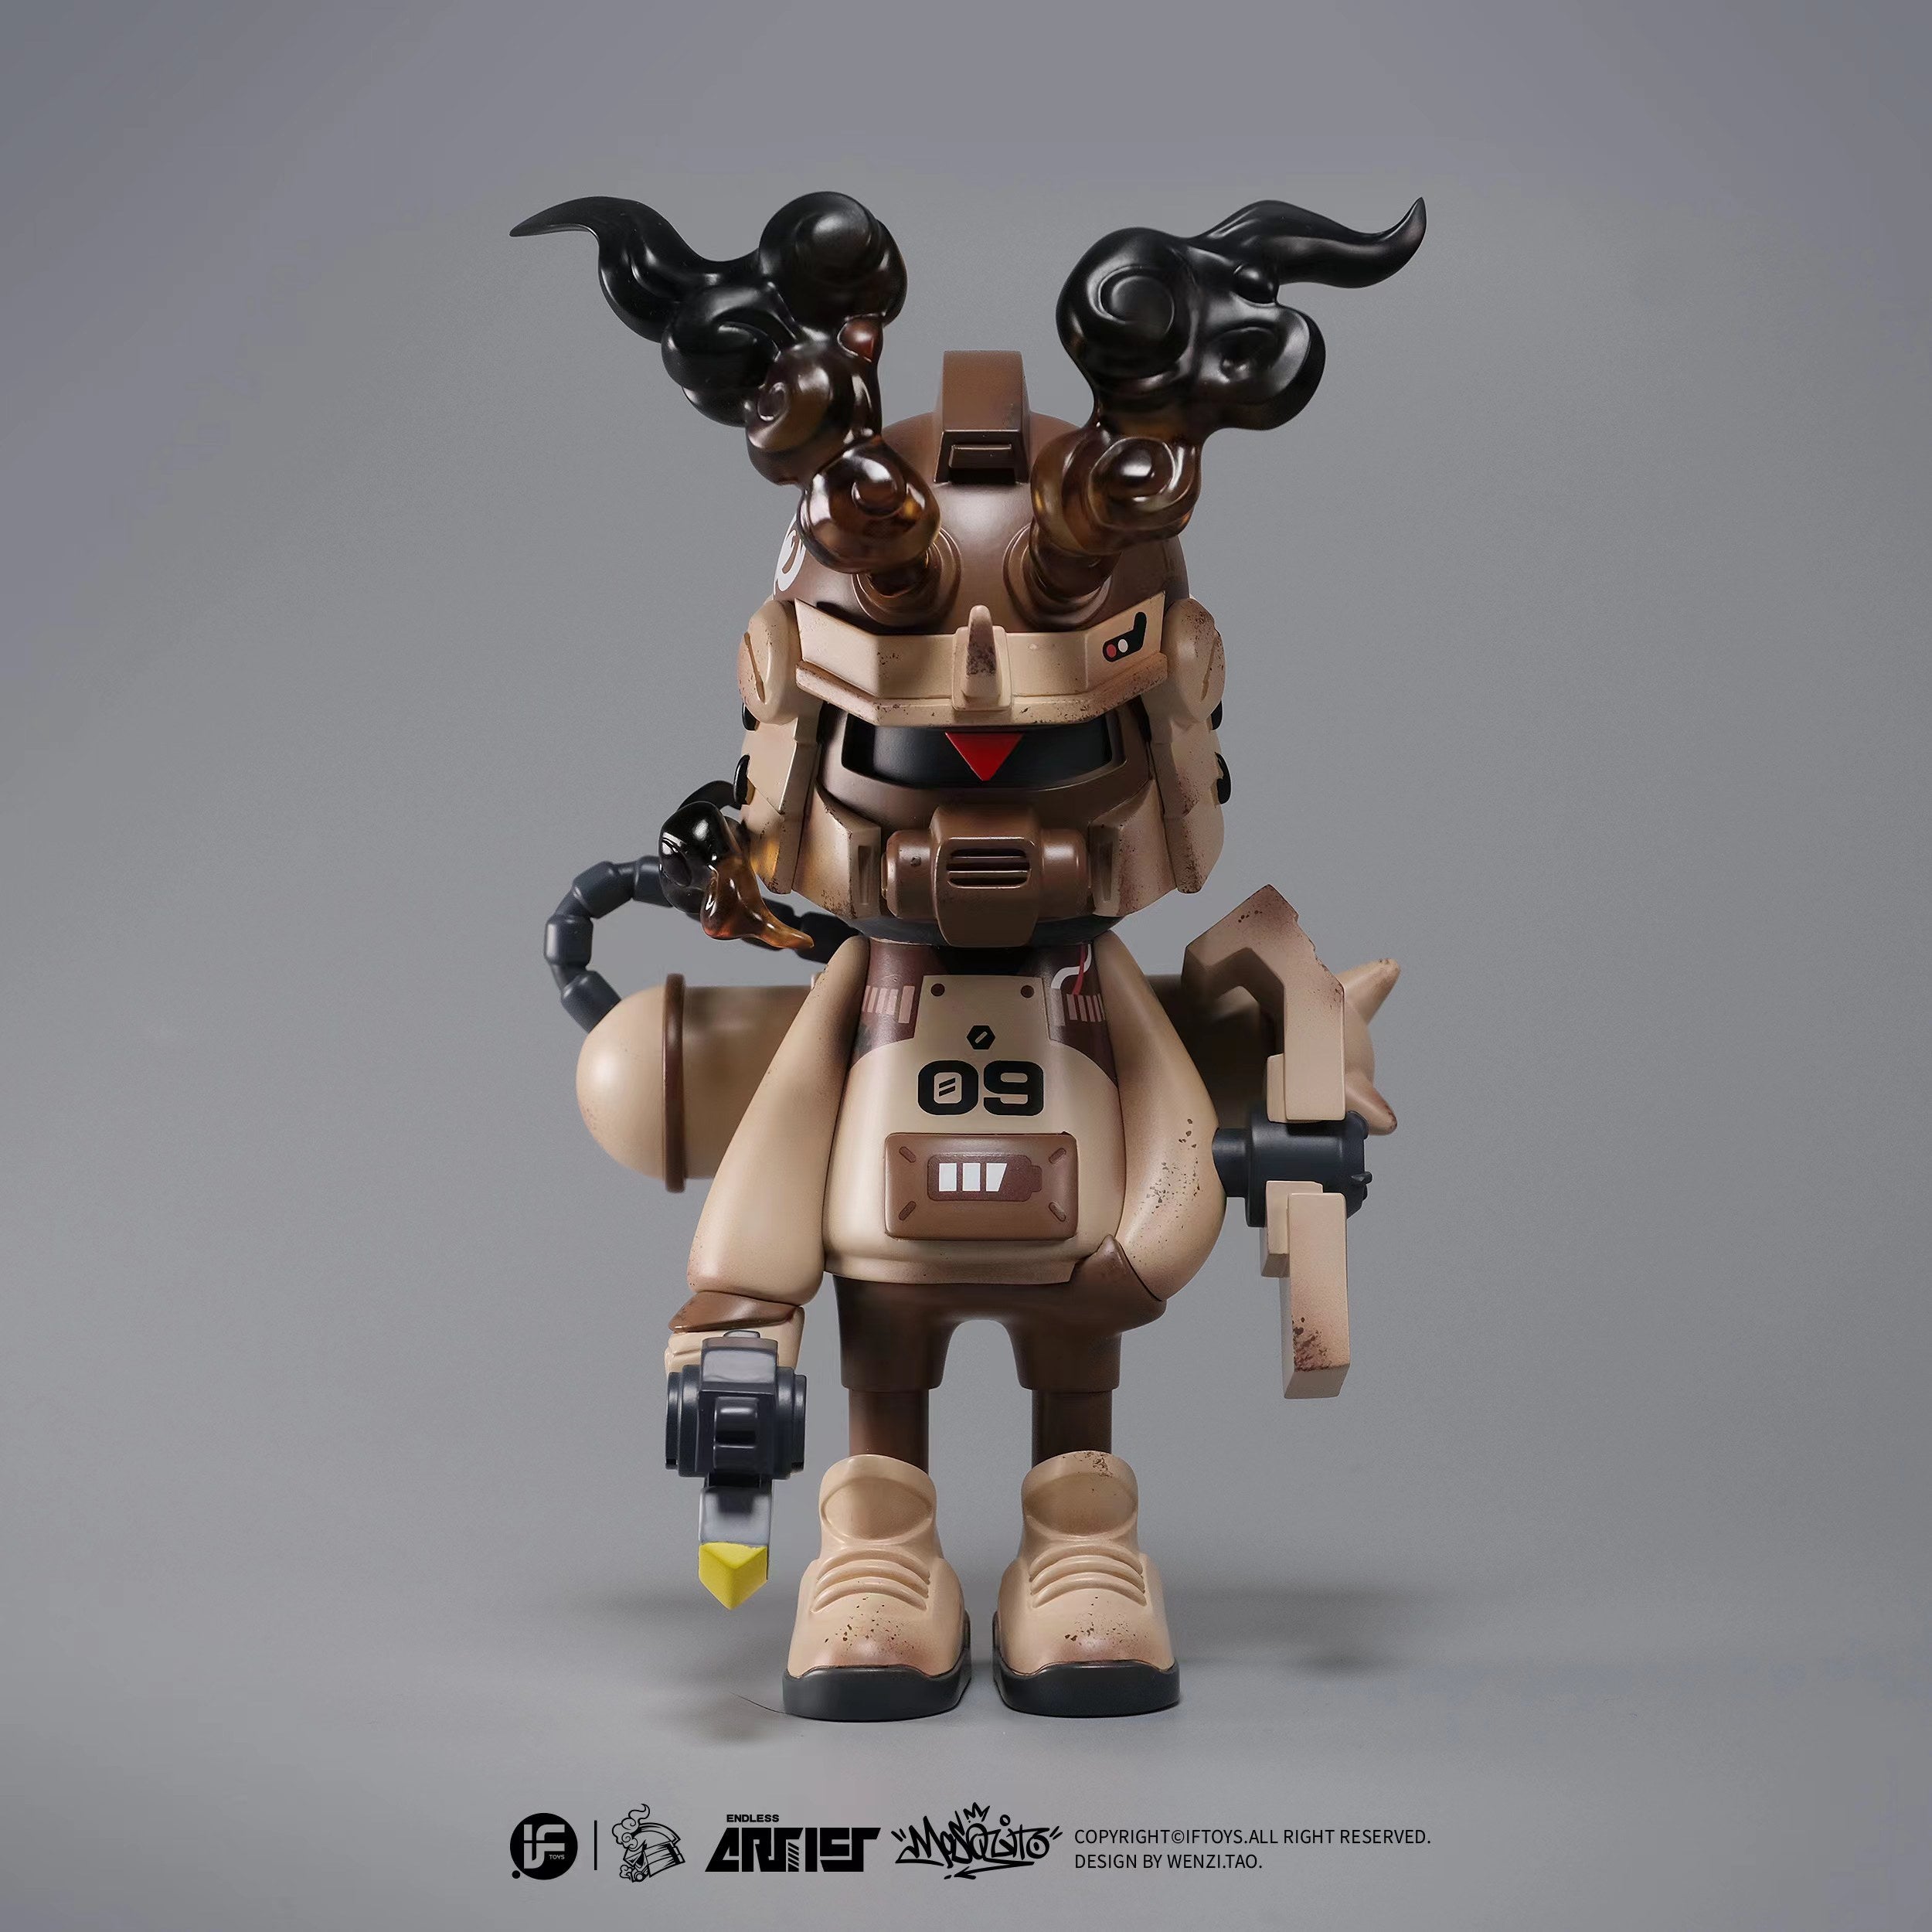 A blind box and art toy store presents ENDLESS SERIES -- Scorpion Force 09 By Wenzi.Tao, a 6.1 toy robot with horns and a mask. Limited edition resin figurine.